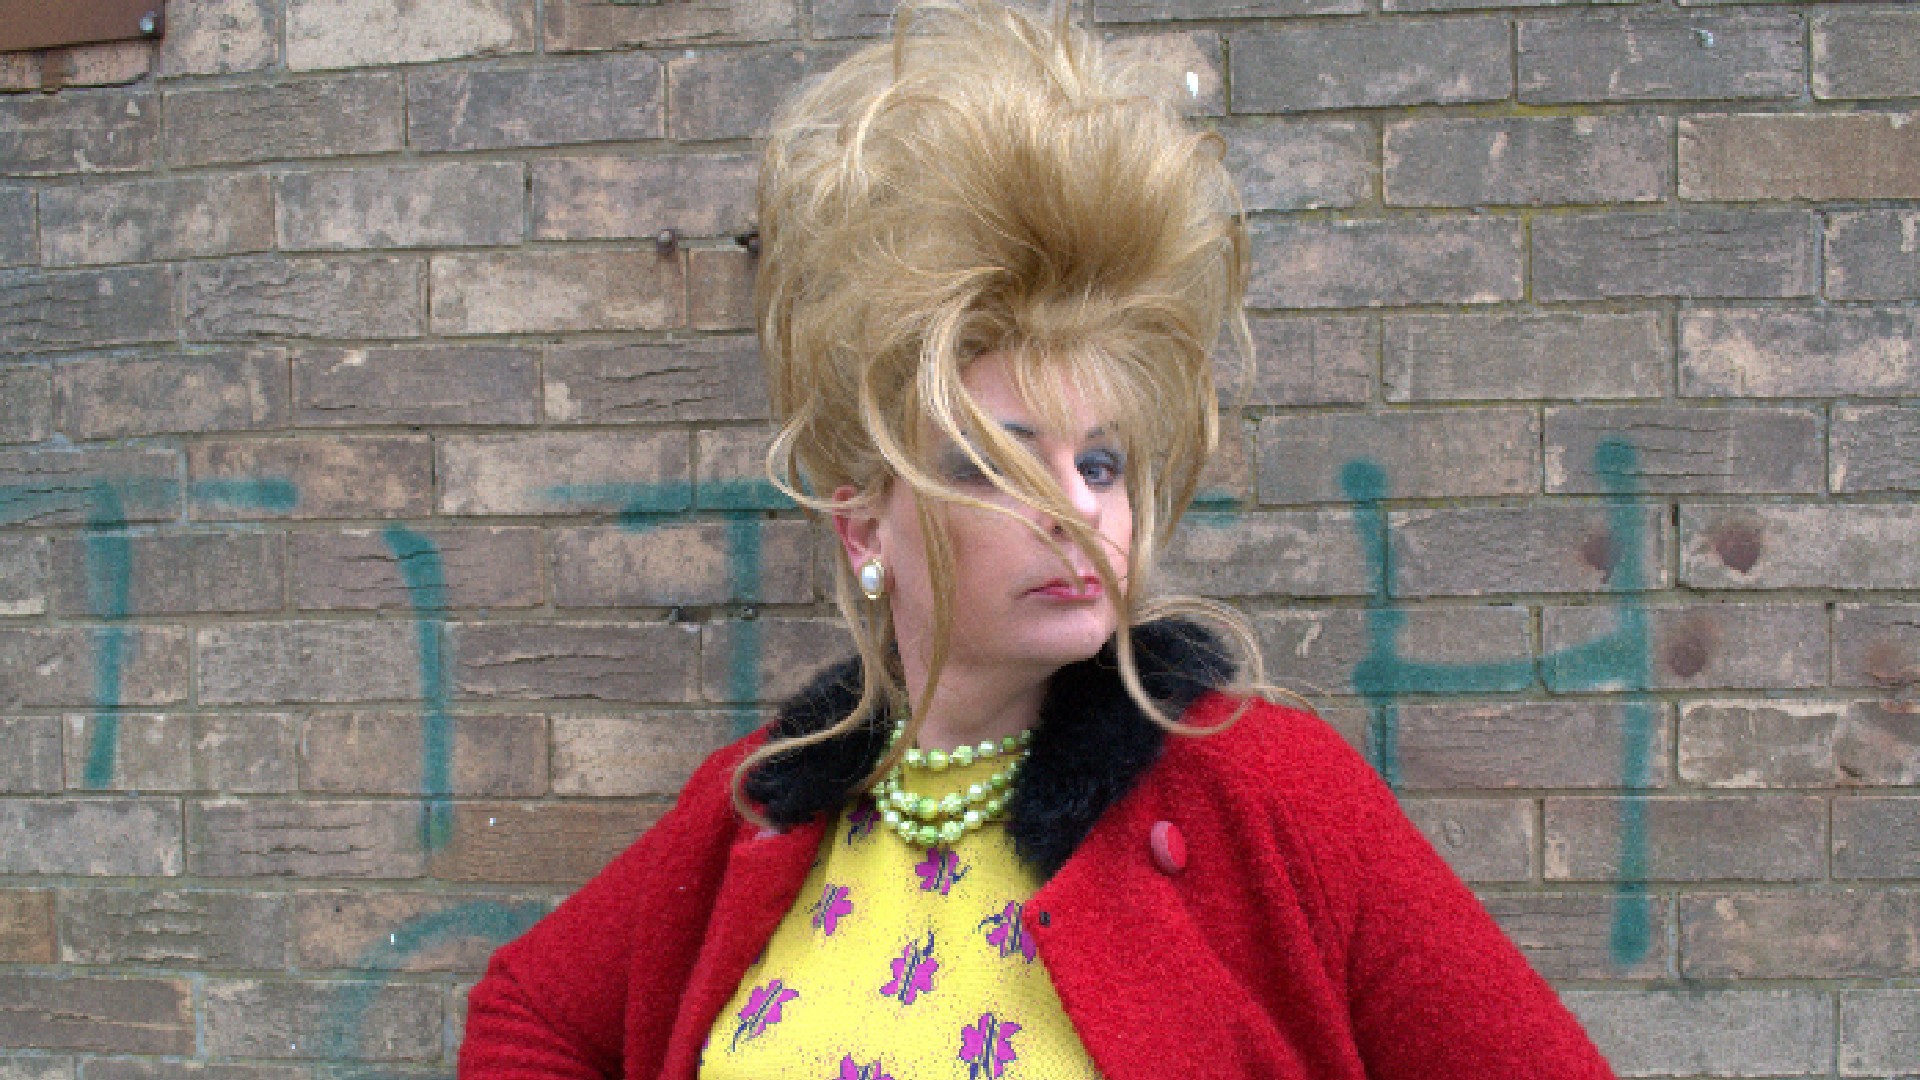 An image of a drag performer outside.